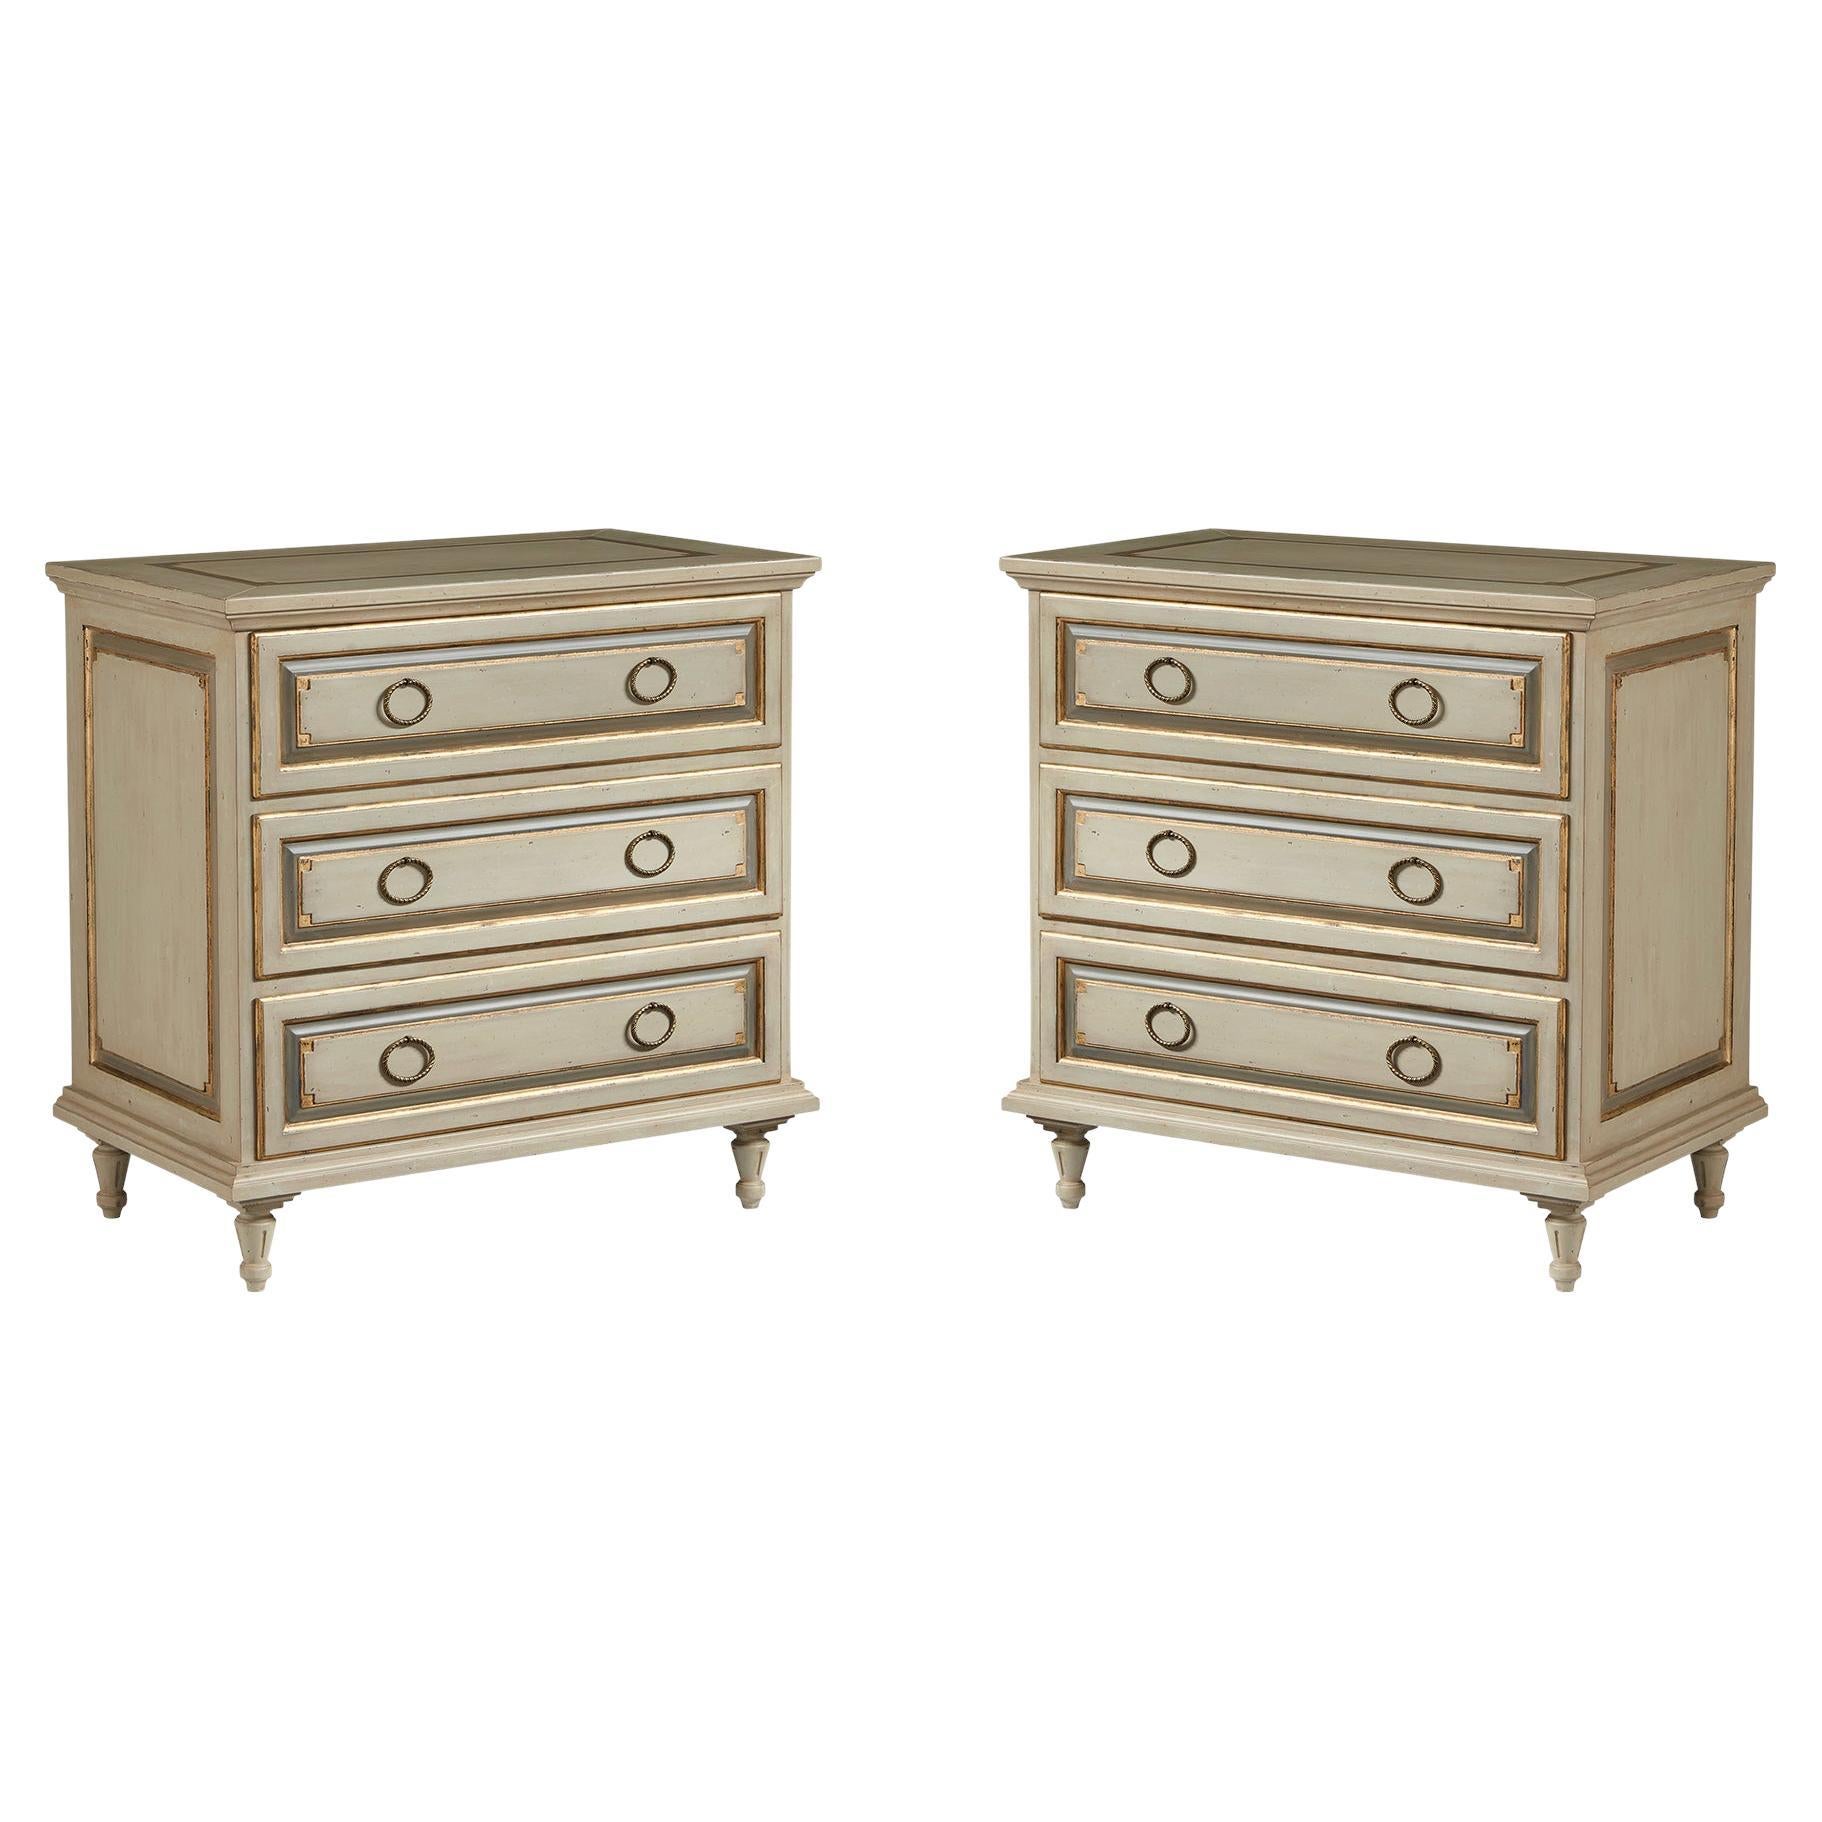 Pair of French Provincial Painted Nightstands For Sale